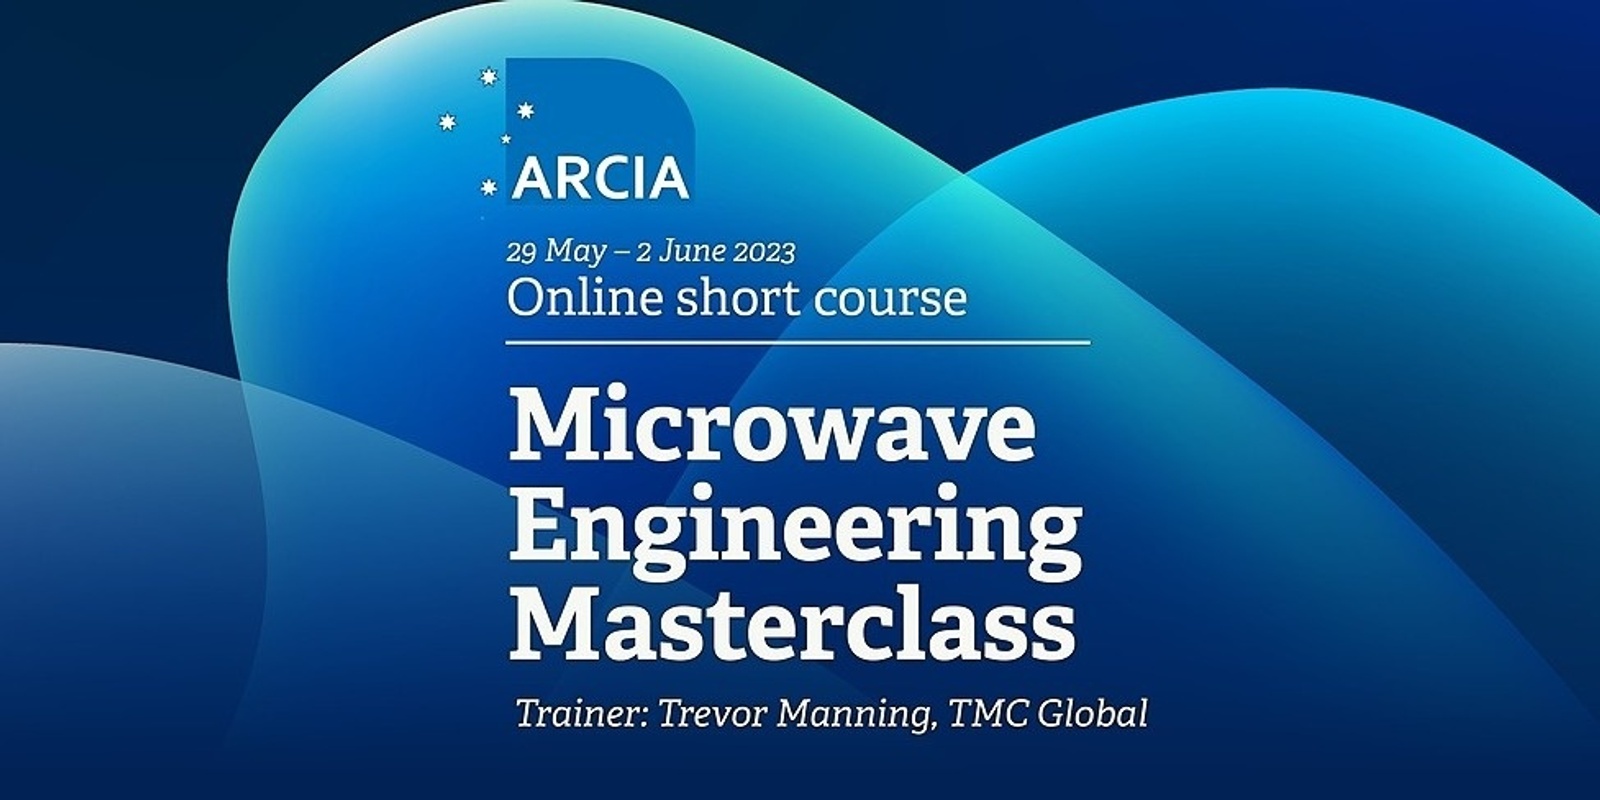 ARCIA Microwave Engineering Masterclass [Online short course]